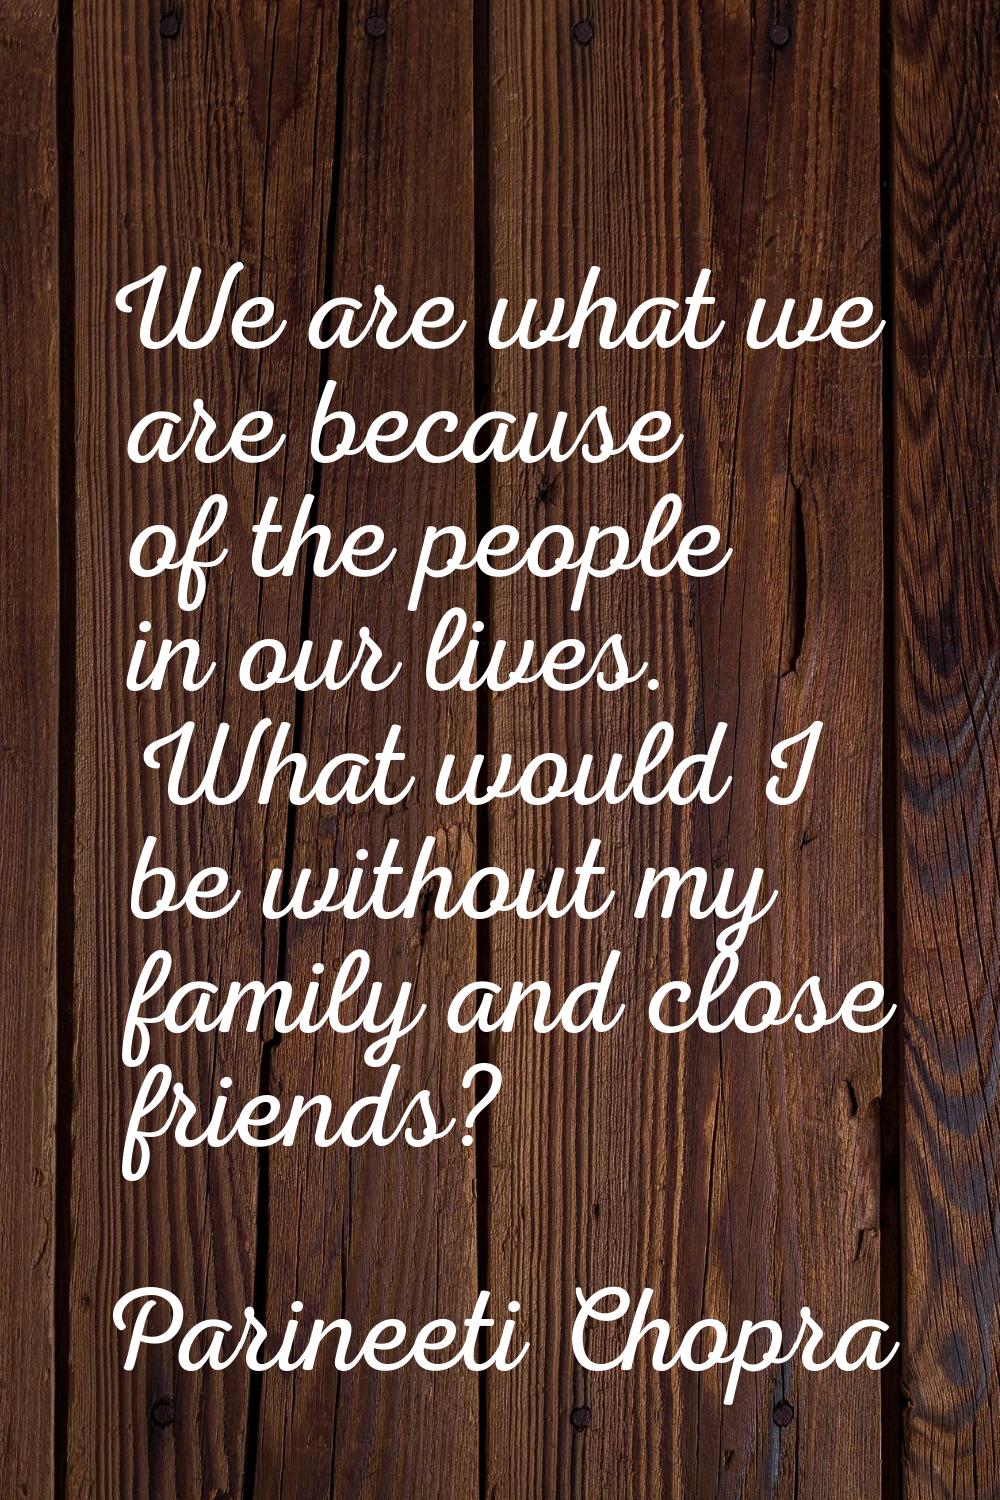 We are what we are because of the people in our lives. What would I be without my family and close 